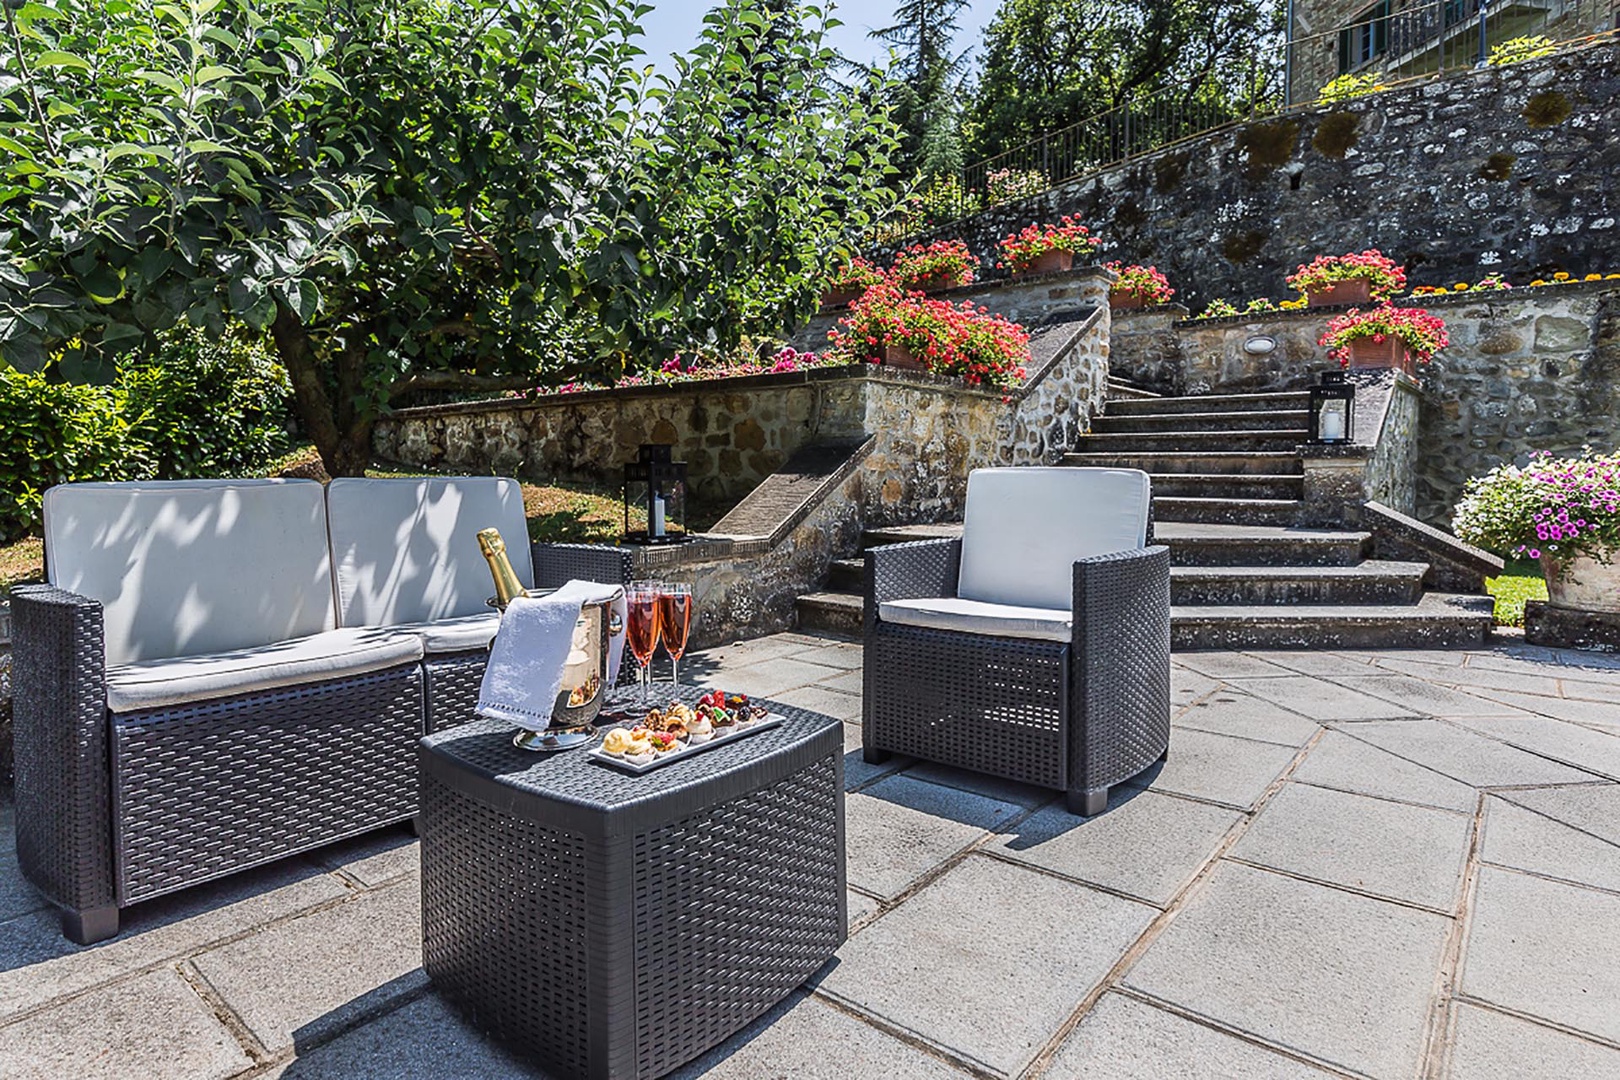 Enjoy the truly spectacular views from this outdoor seating area.